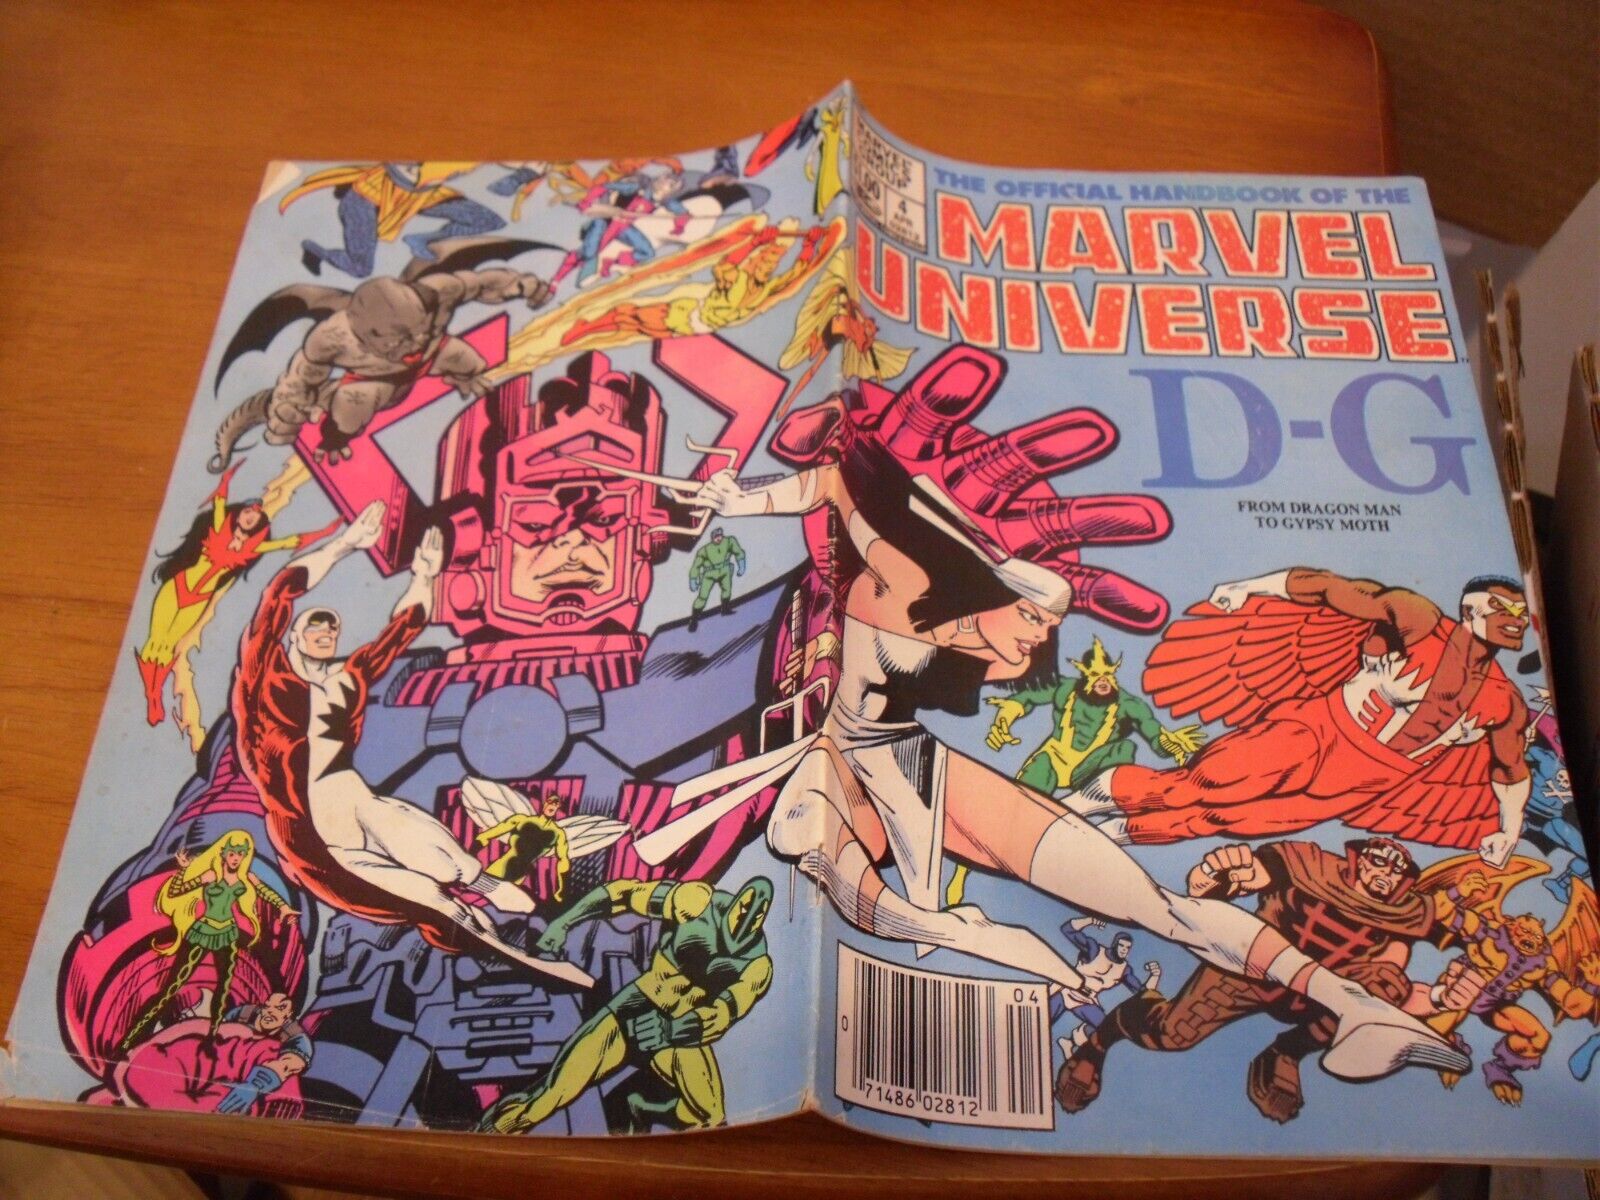 The Official Handbook Of The Marvel Universe D-G #4 - April 1983   BD